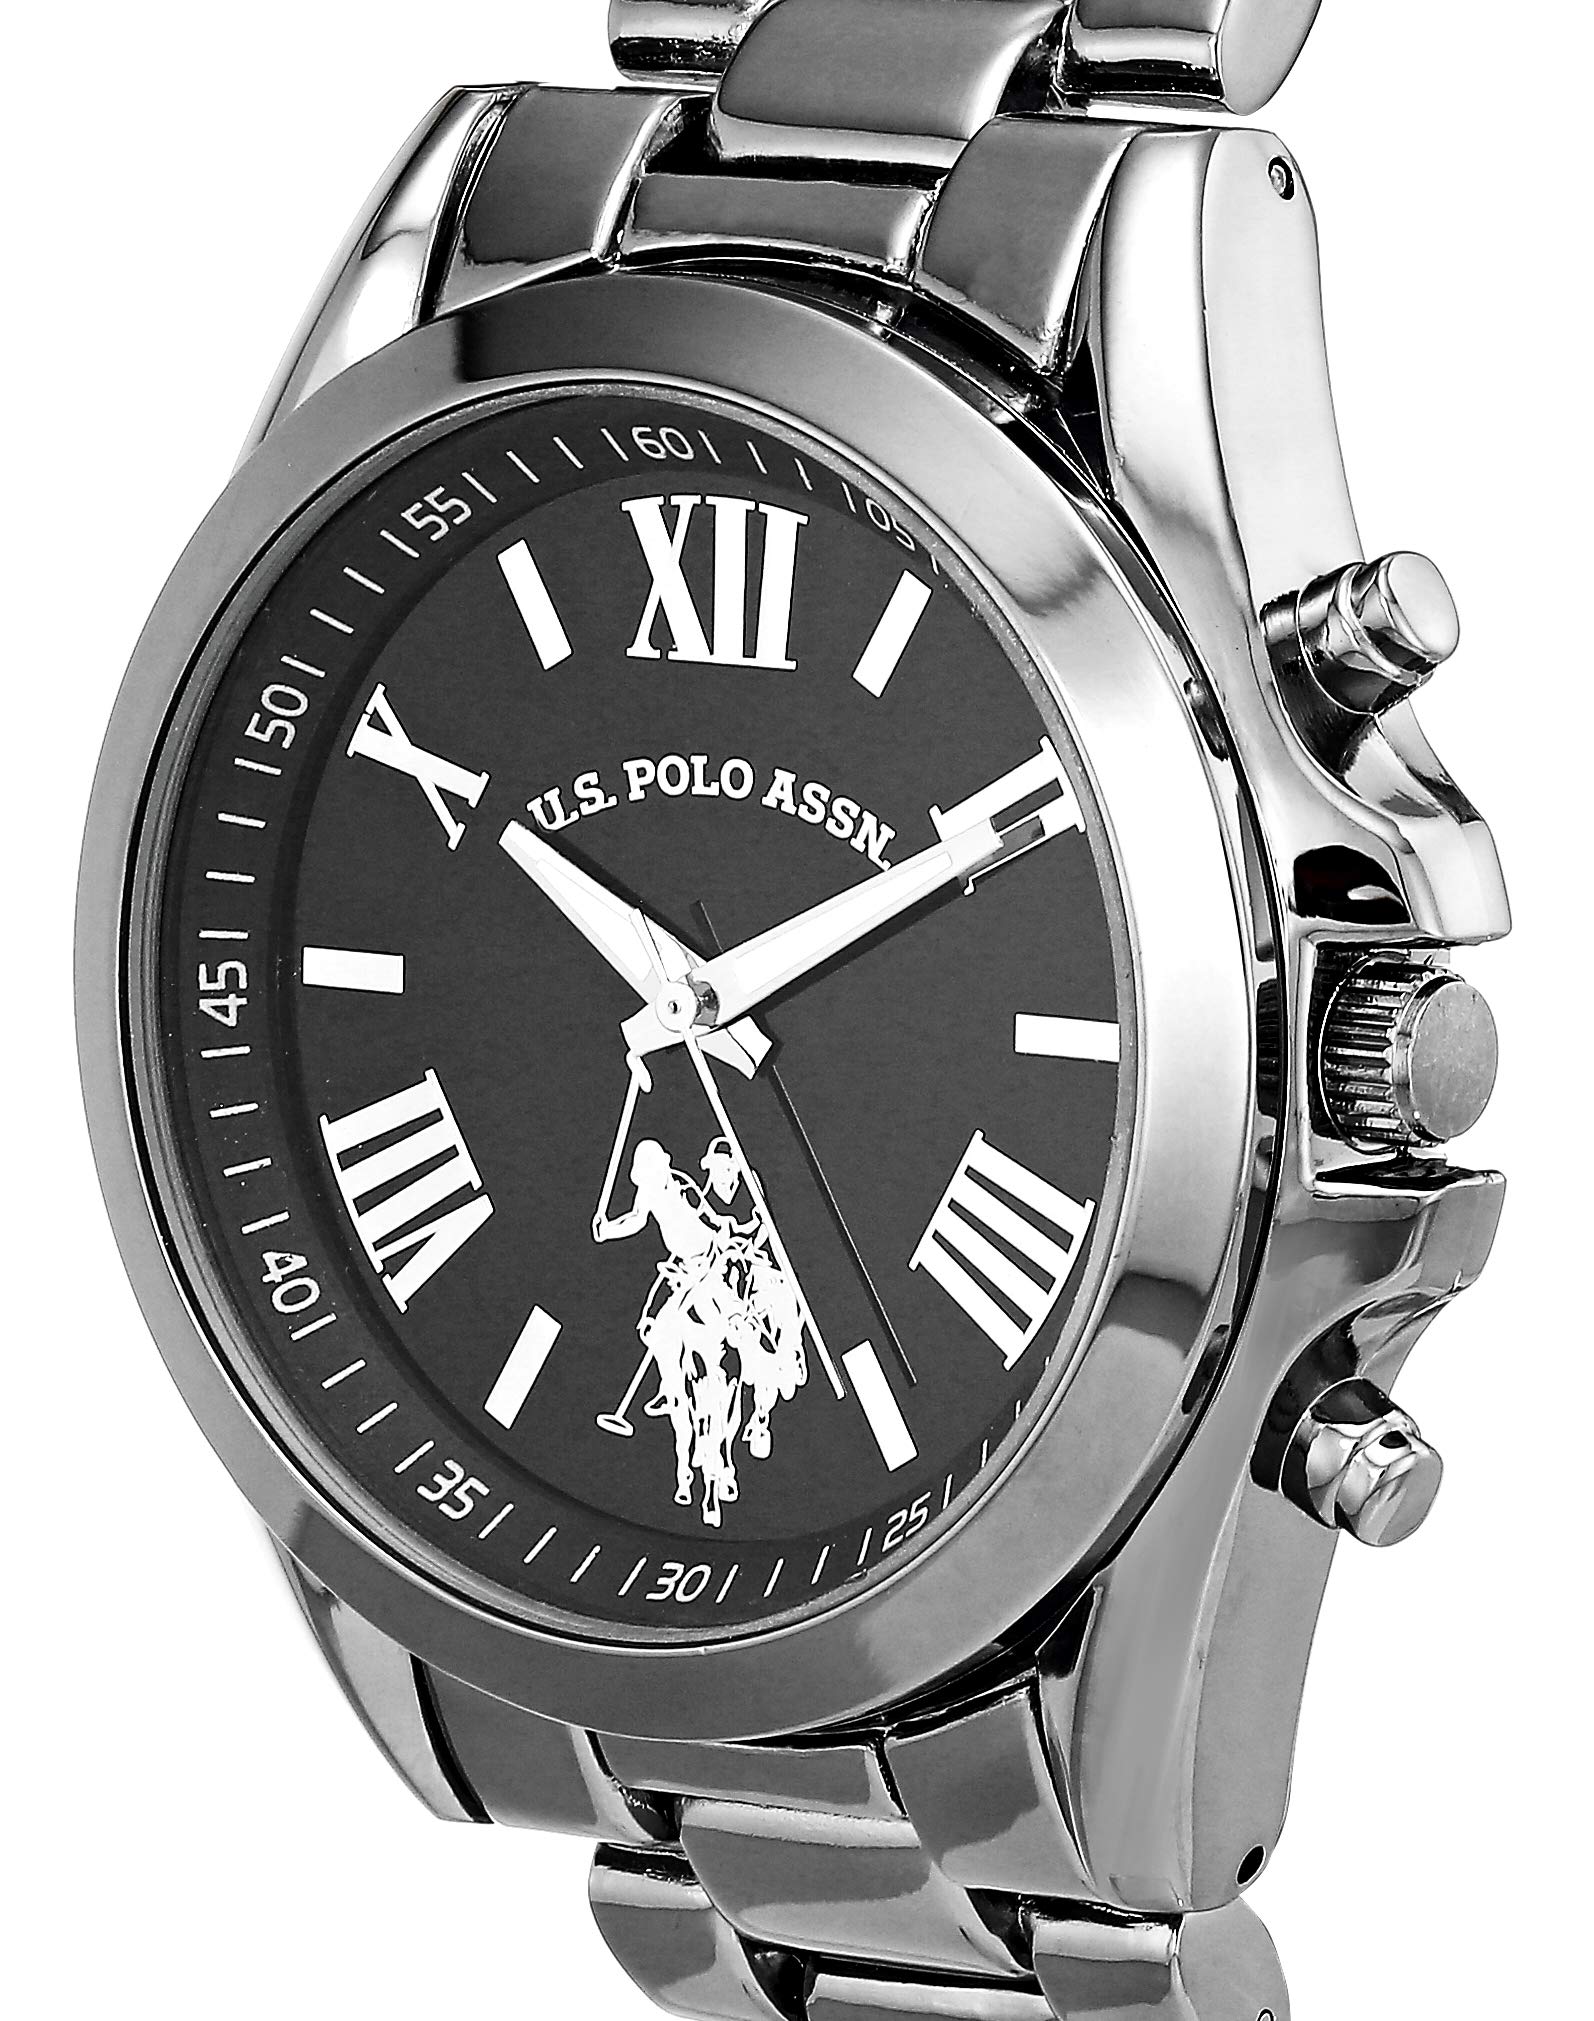 Accutime US Polo Ass. Watch